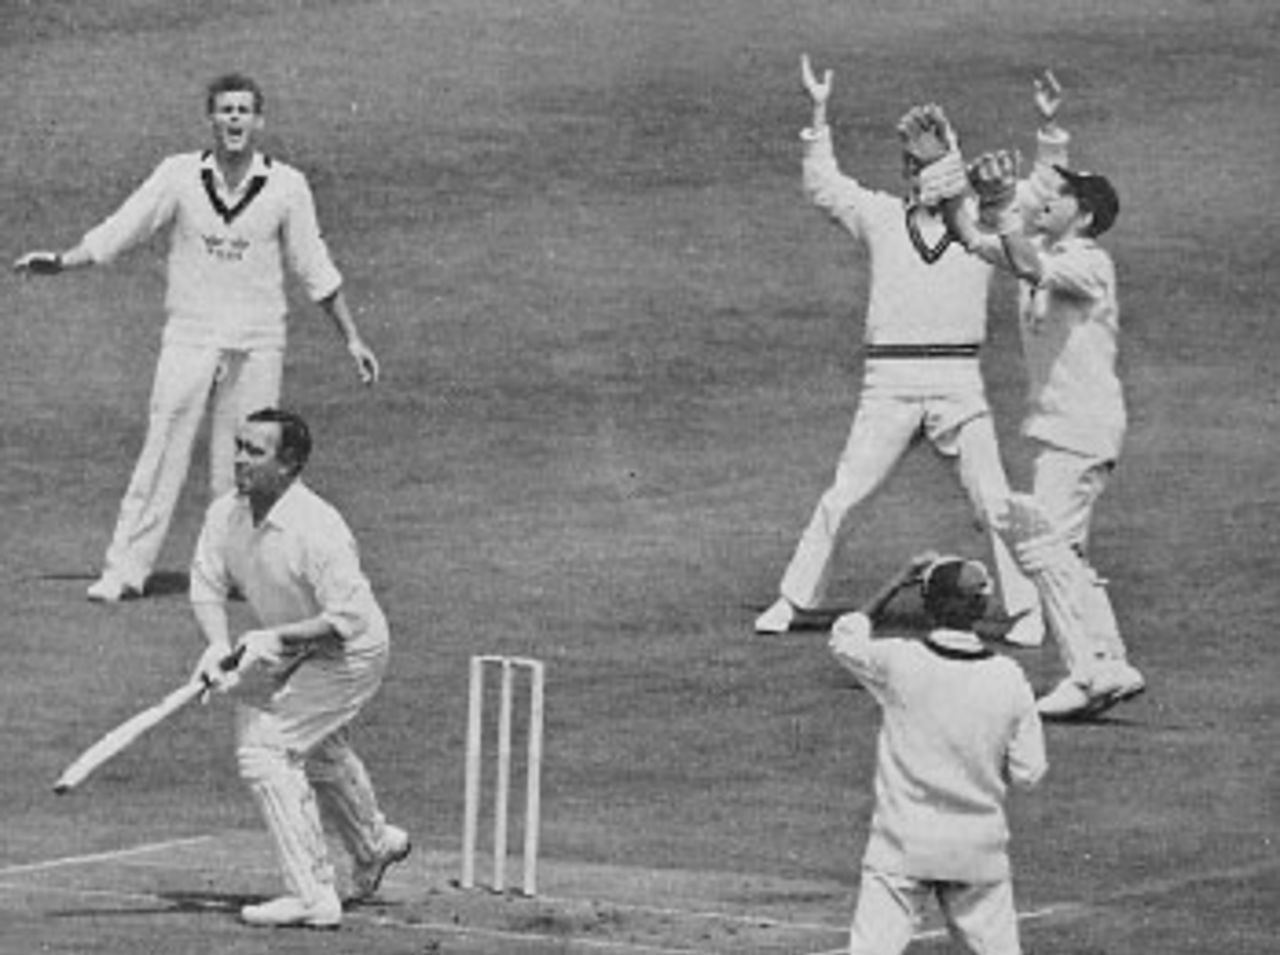 Denis Compton returned to Lord's in June 1963 to play for MCC against Oxford University.  He was caught by Majendi off Martin for 1 in the first innings, but scored 87 in the second innings